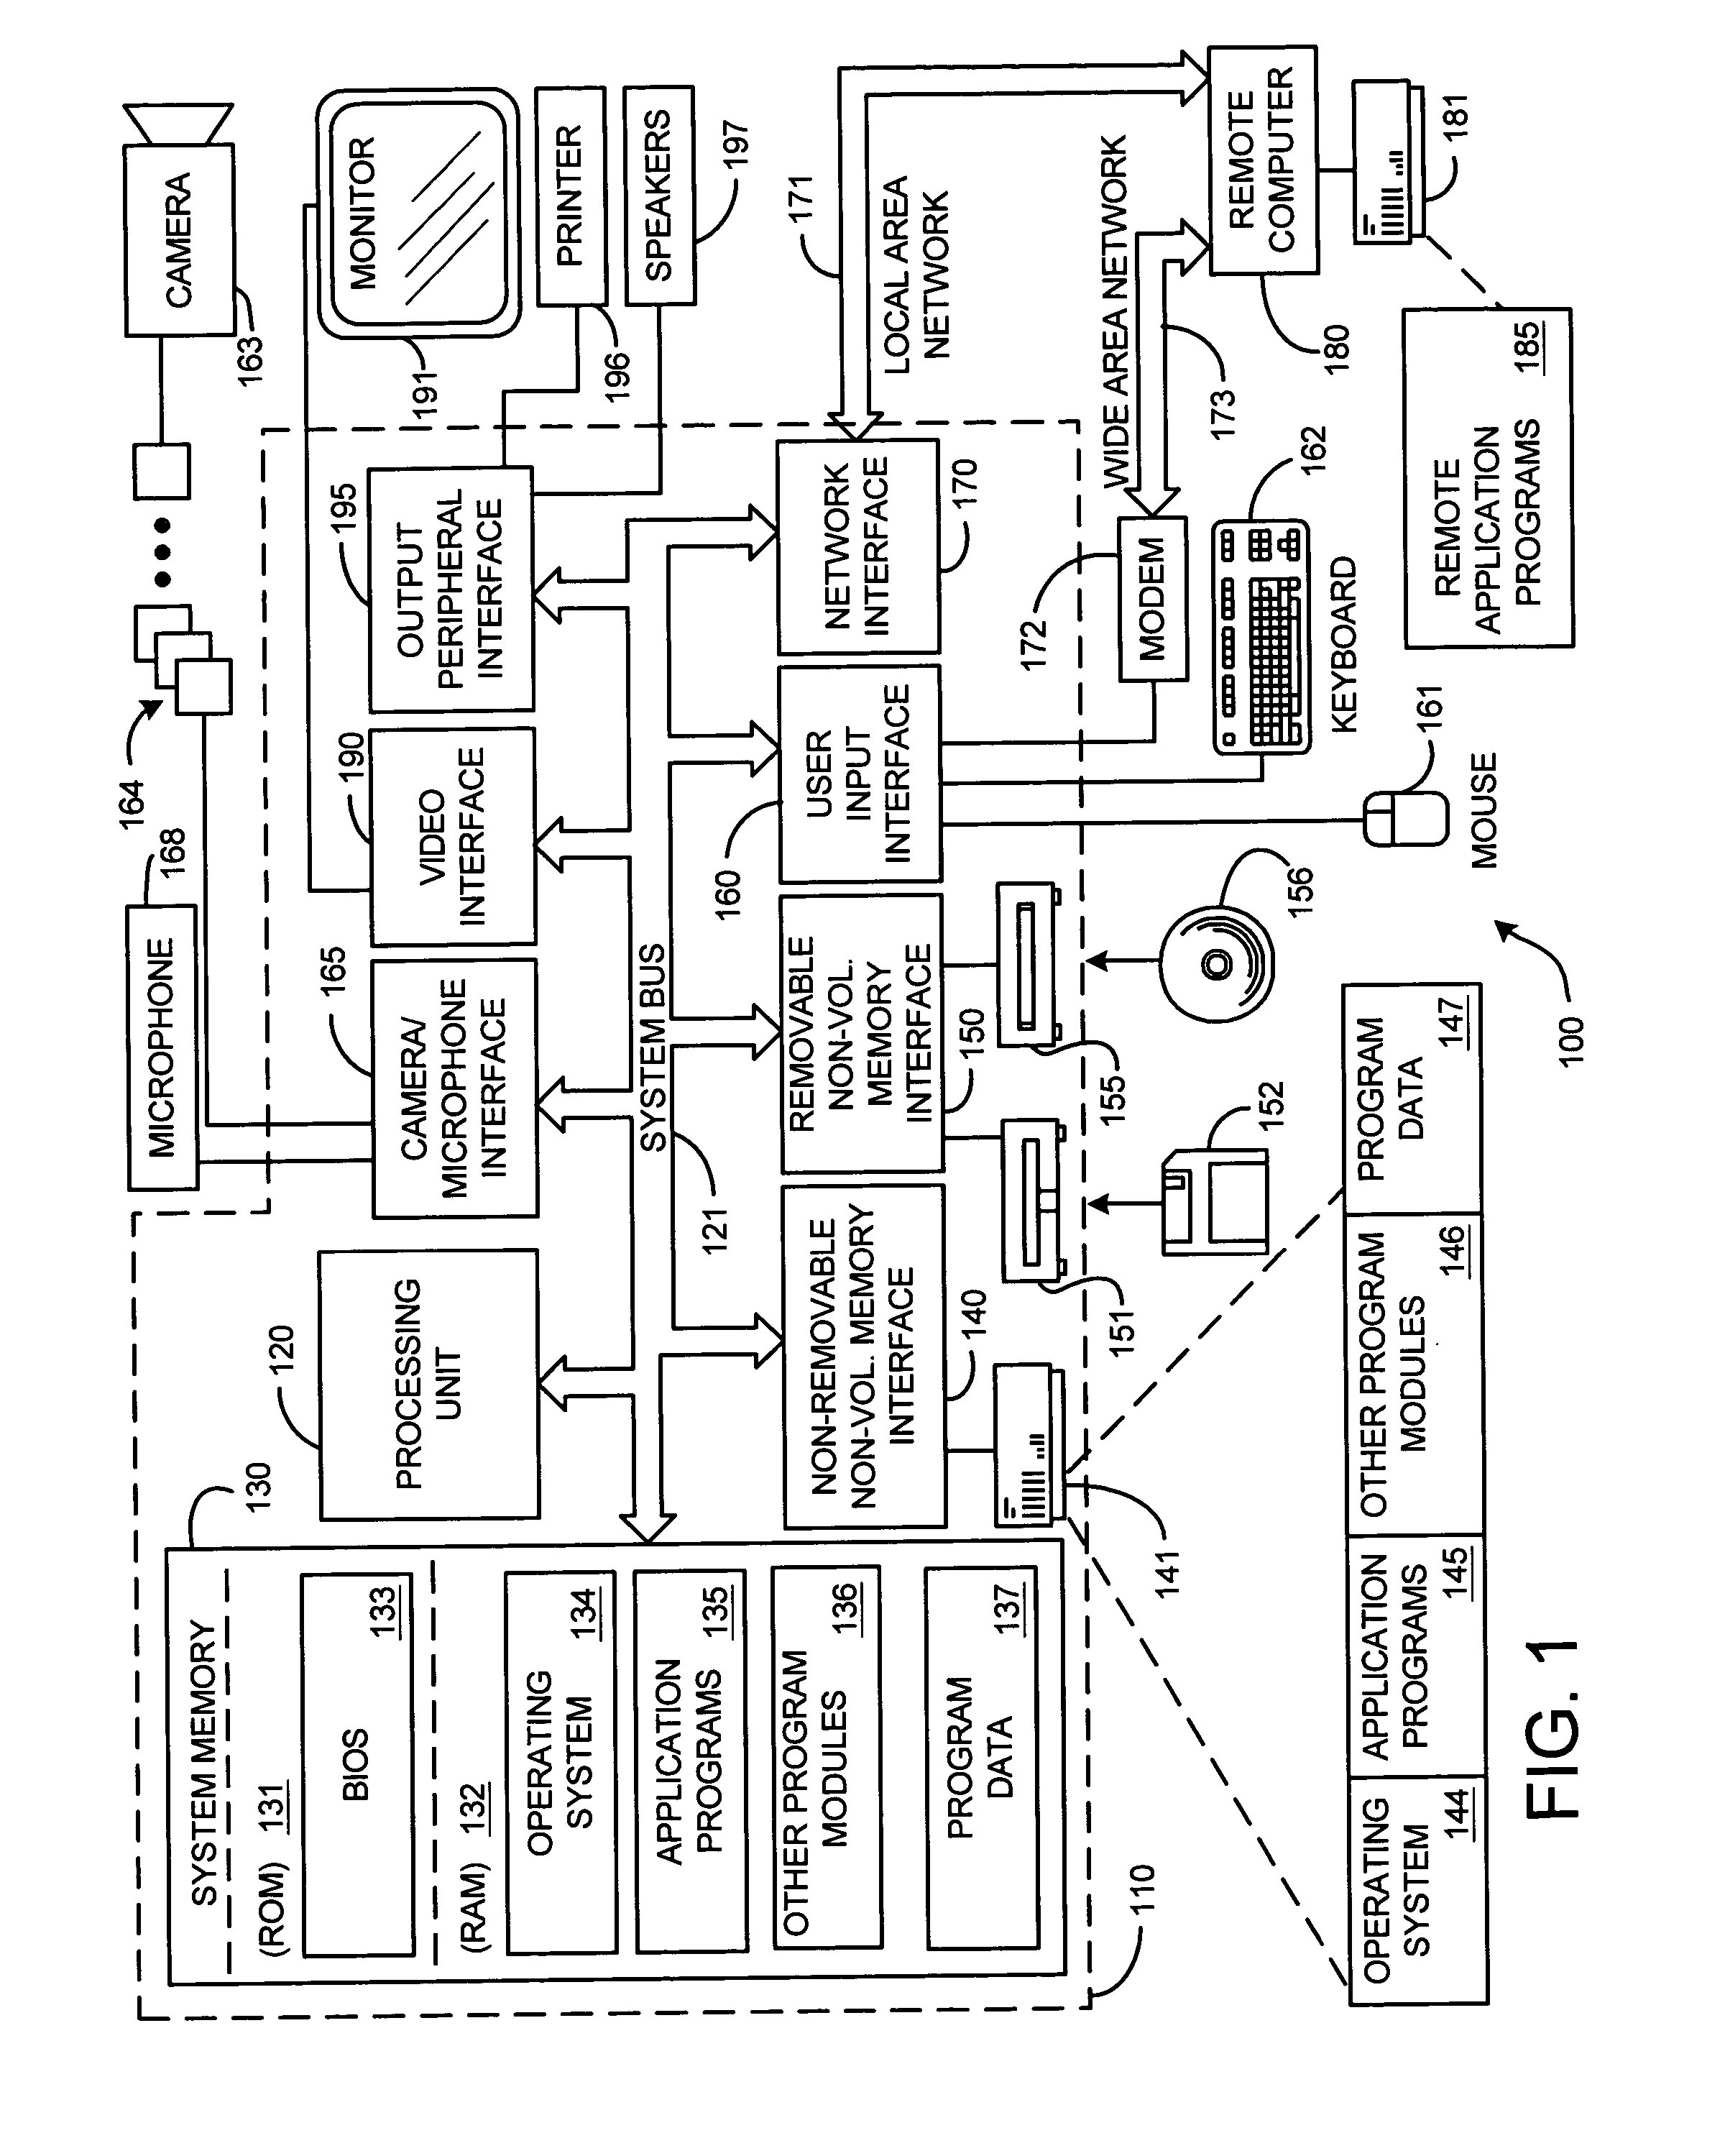 System and method for devising a human interactive proof that determines whether a remote client is a human or a computer program